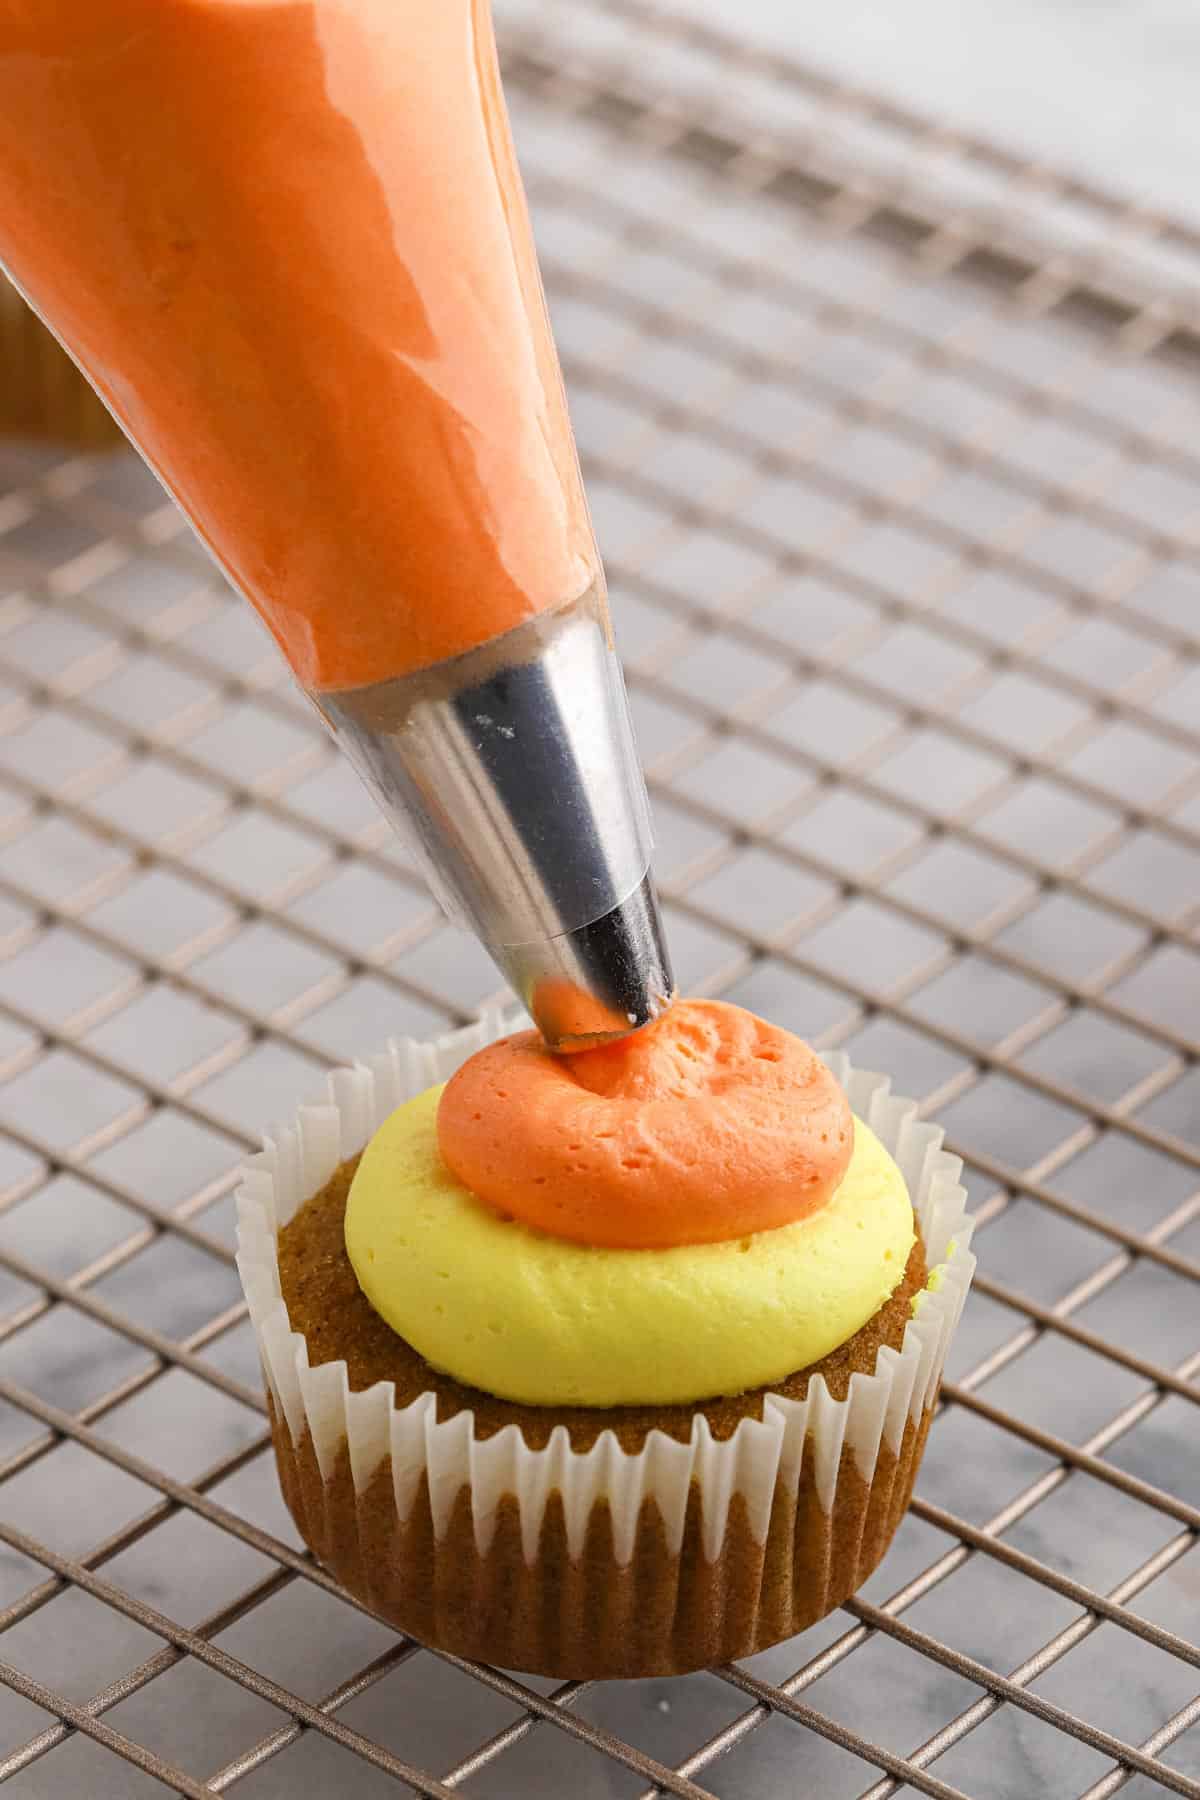 Adding the orange frosting on top.